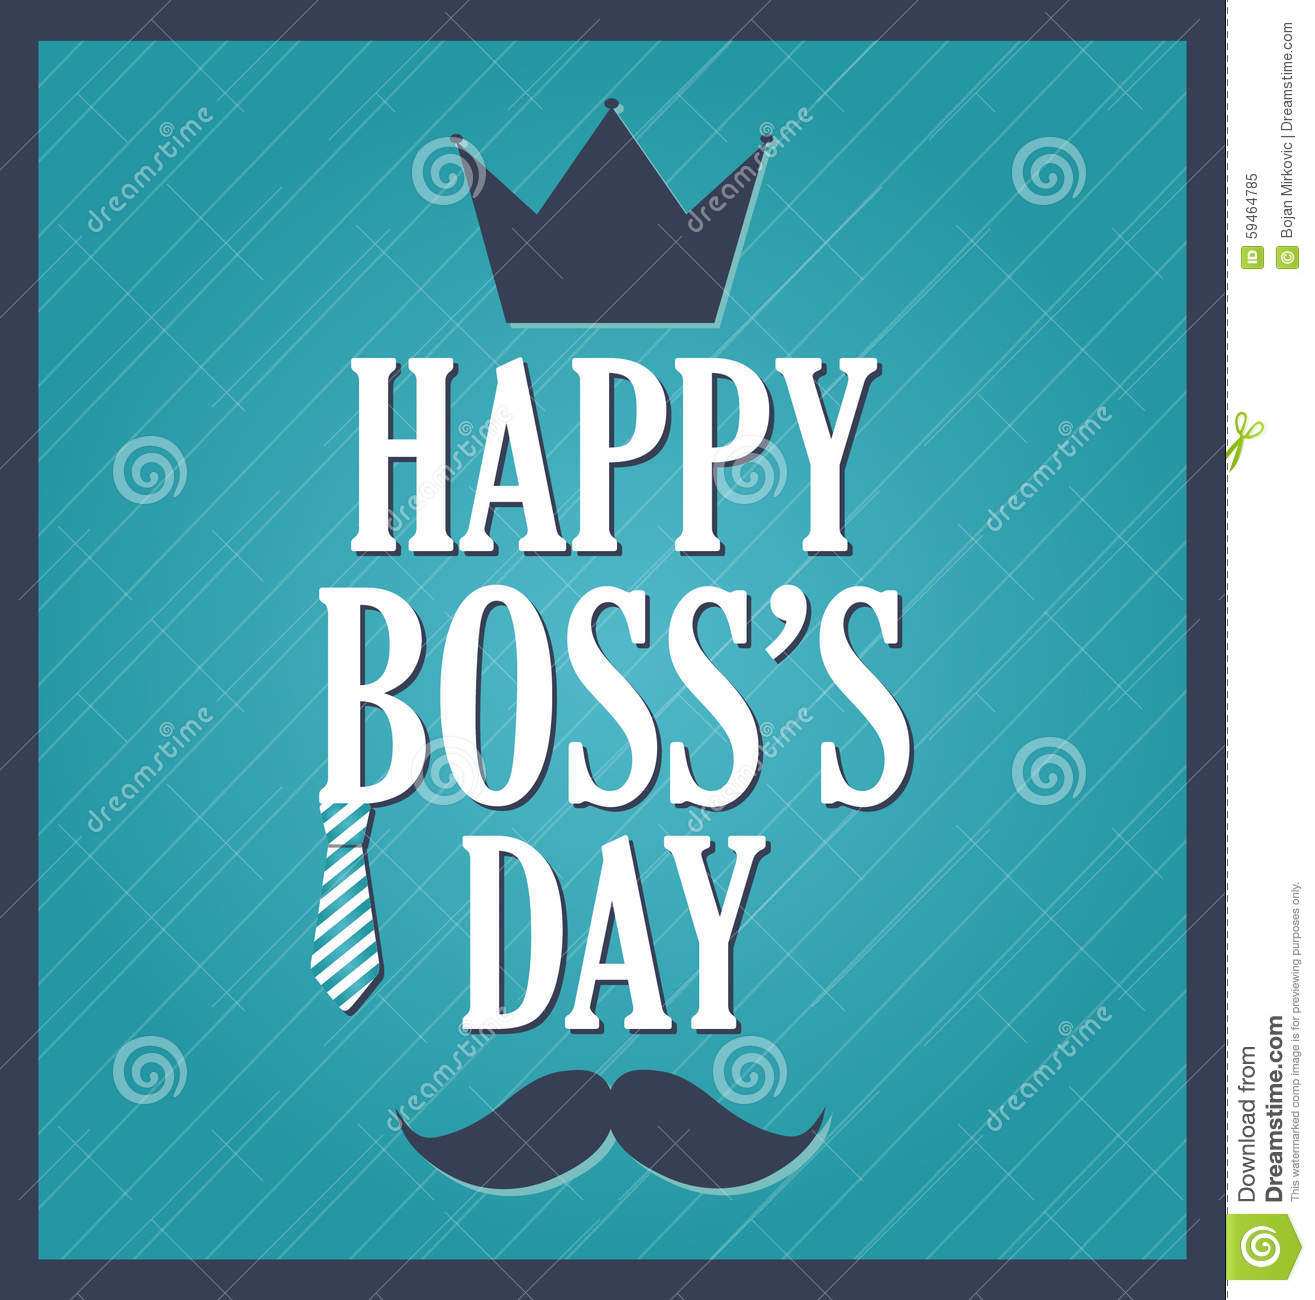 69 Free Printable Happy Boss S Day Greeting Card Templates With Stunning Design With Happy Boss S Day Greeting Card Templates Cards Design Templates